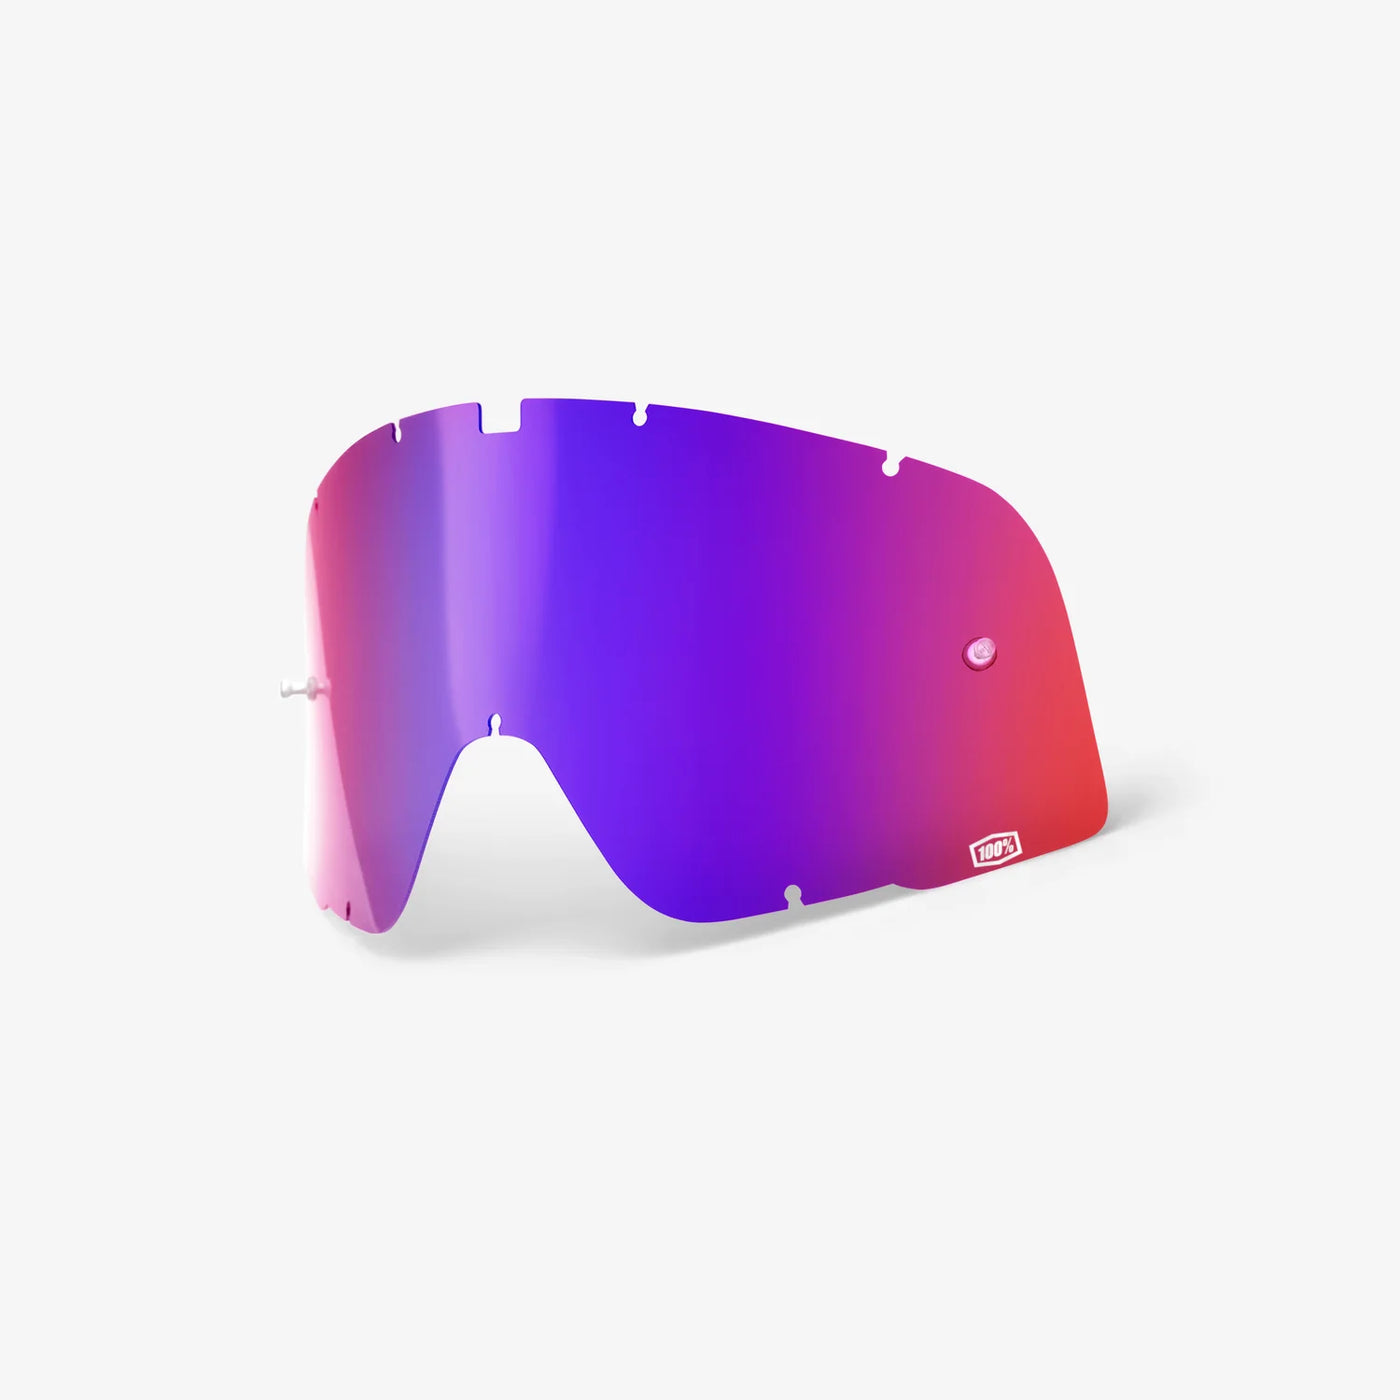 BARSTOW Goggle Replacement Lens Moto Red/Blue Mirror